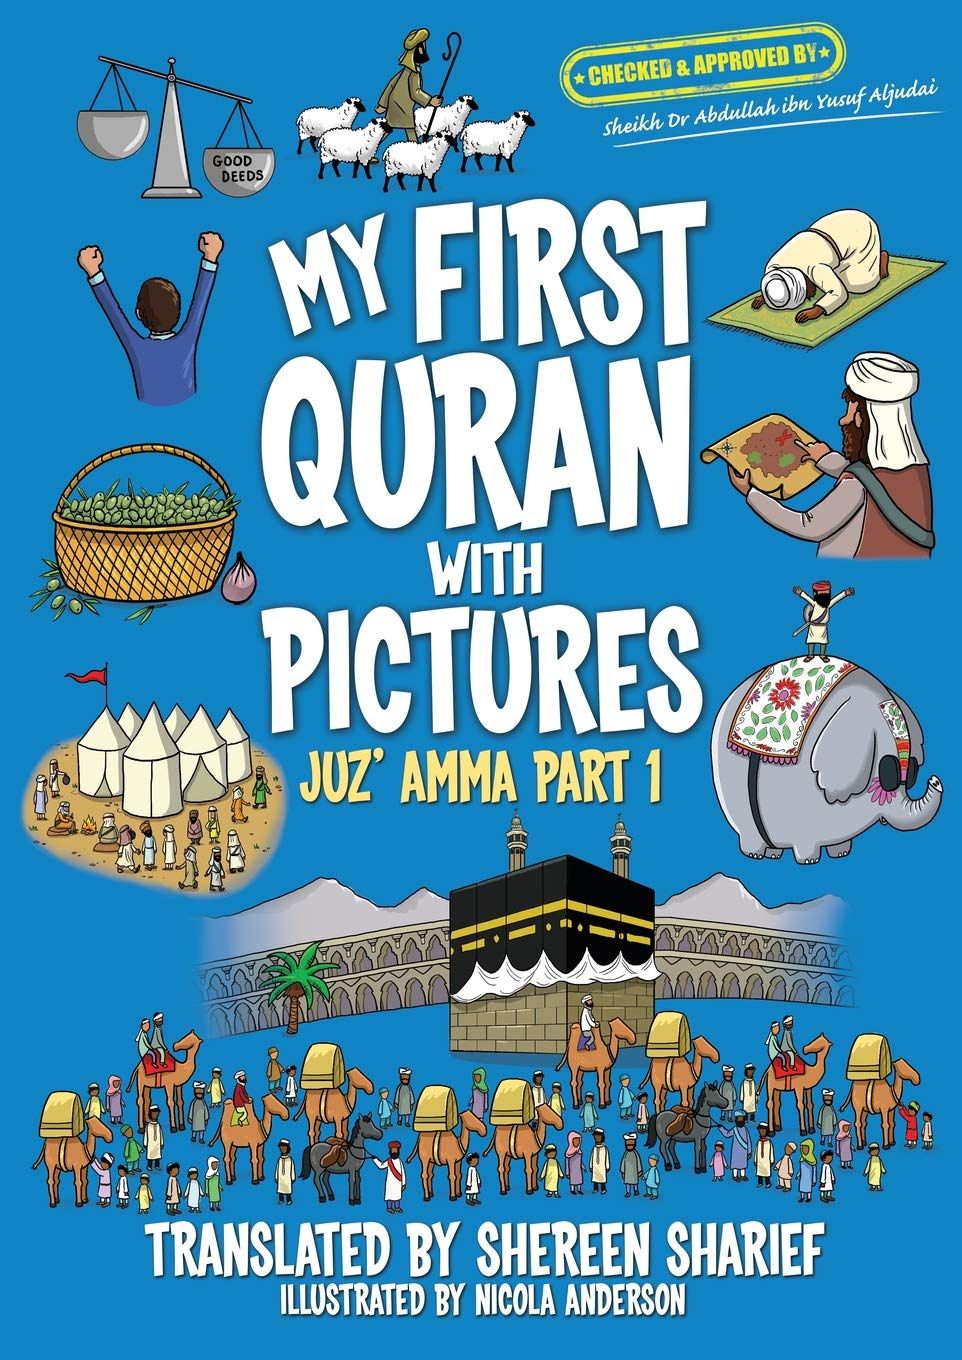 My First Quran With Pictures: Juz Amma Part 1